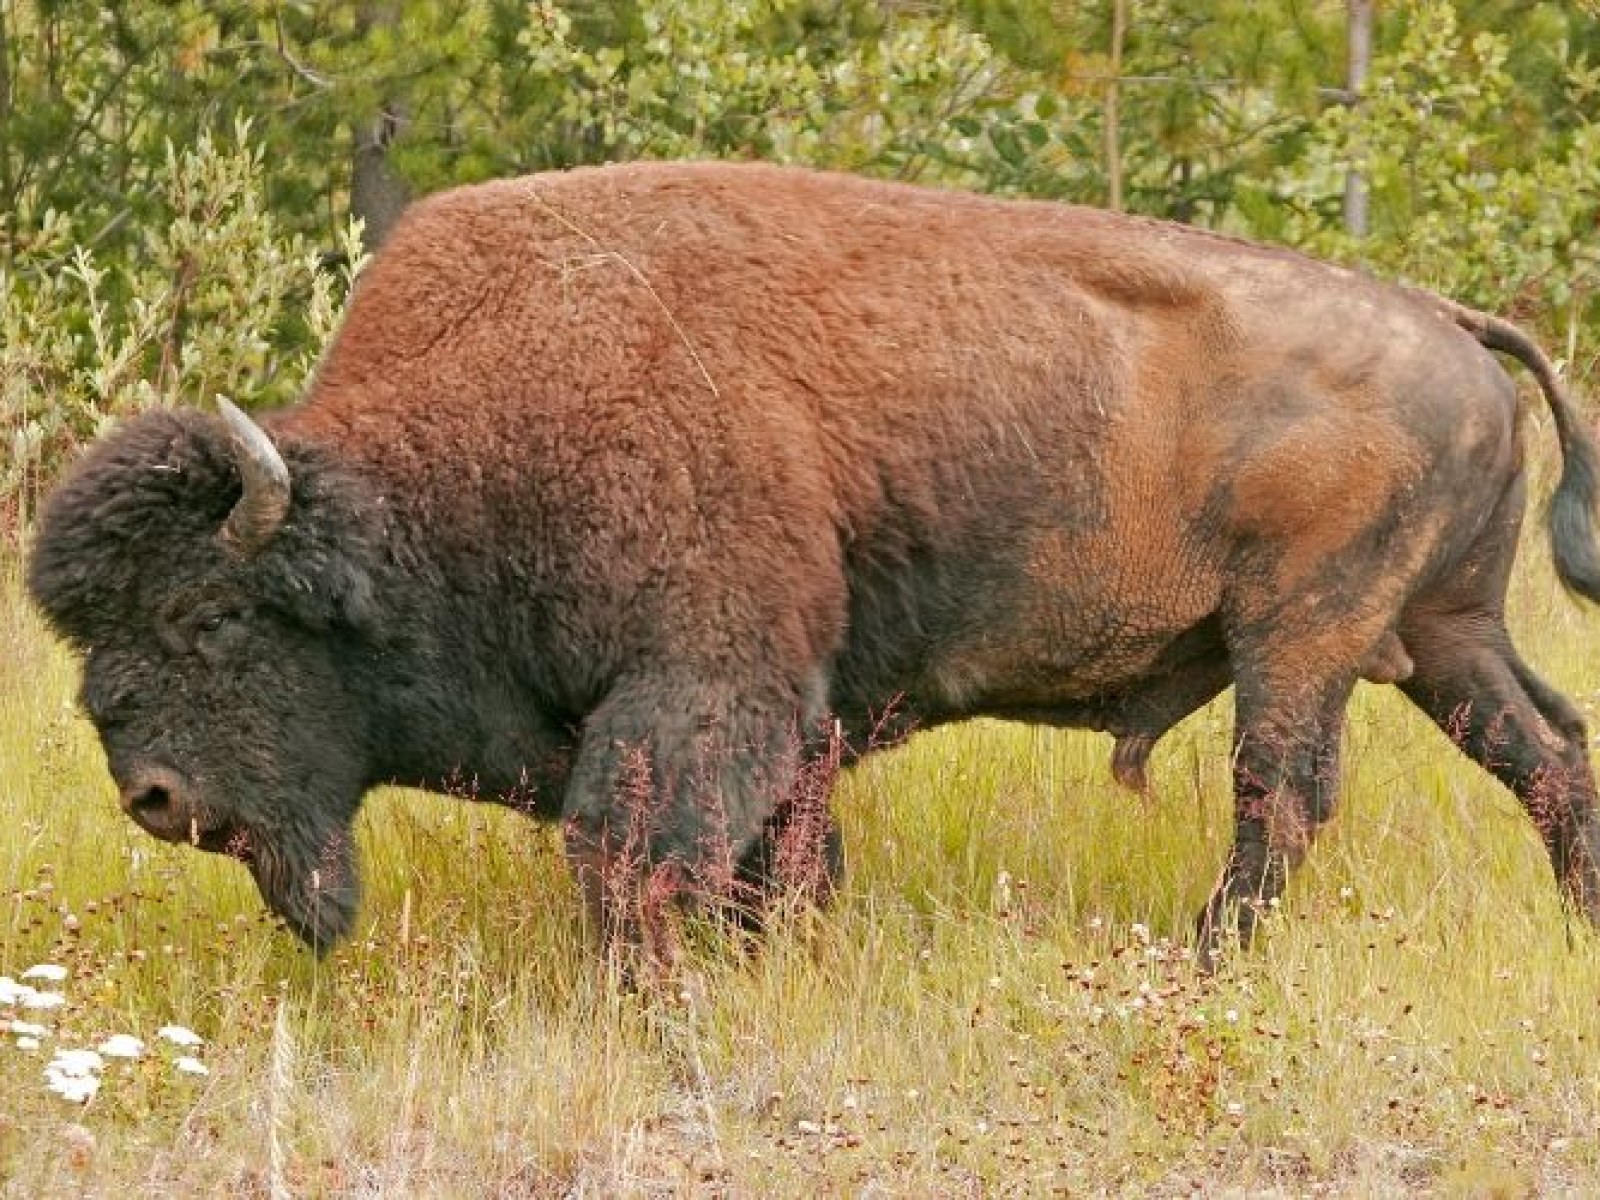 Wood Bison, North America's Largest Animal, to Be Reintroduced Into Alaska